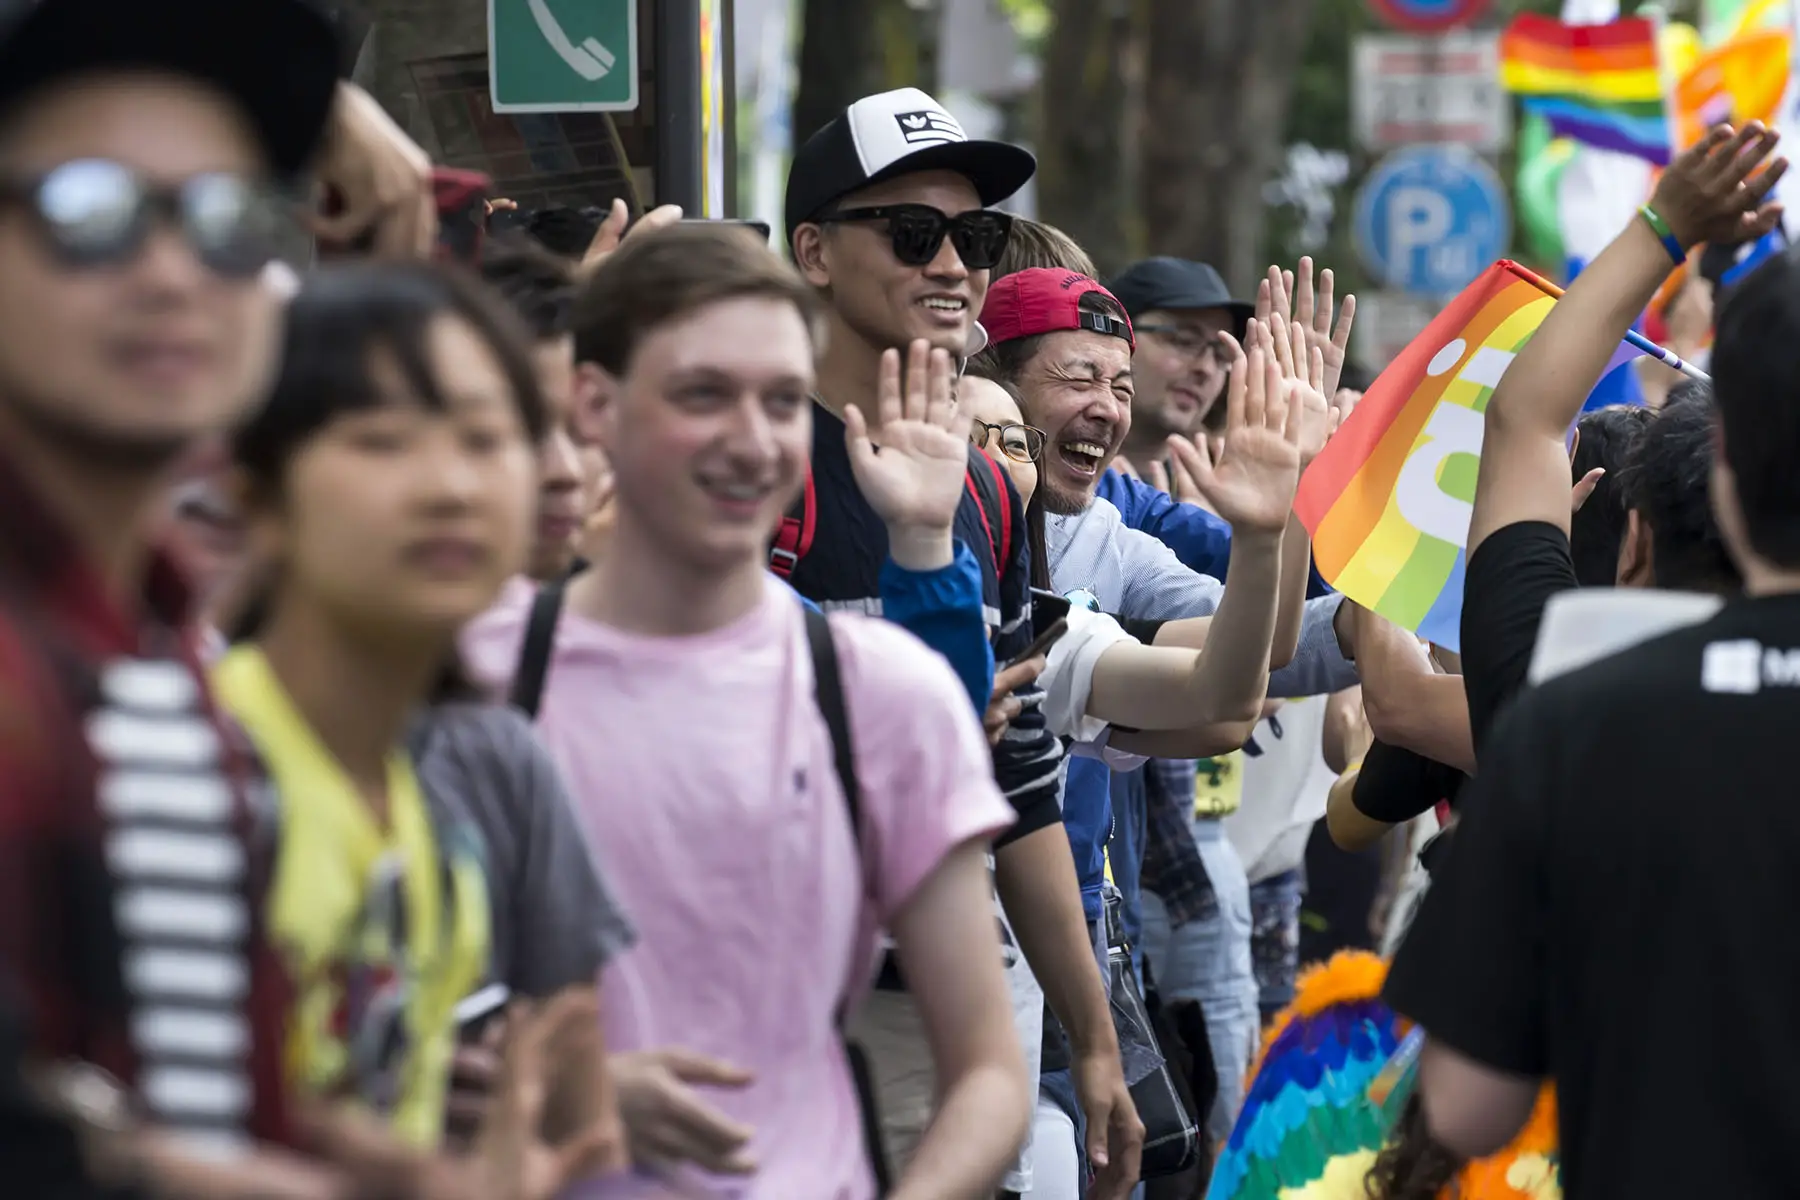 A crowd is cheering as attendees high-five supporters during the 2018 Tokyo Rainbow Pride Parade in Tokyo, Japan. 